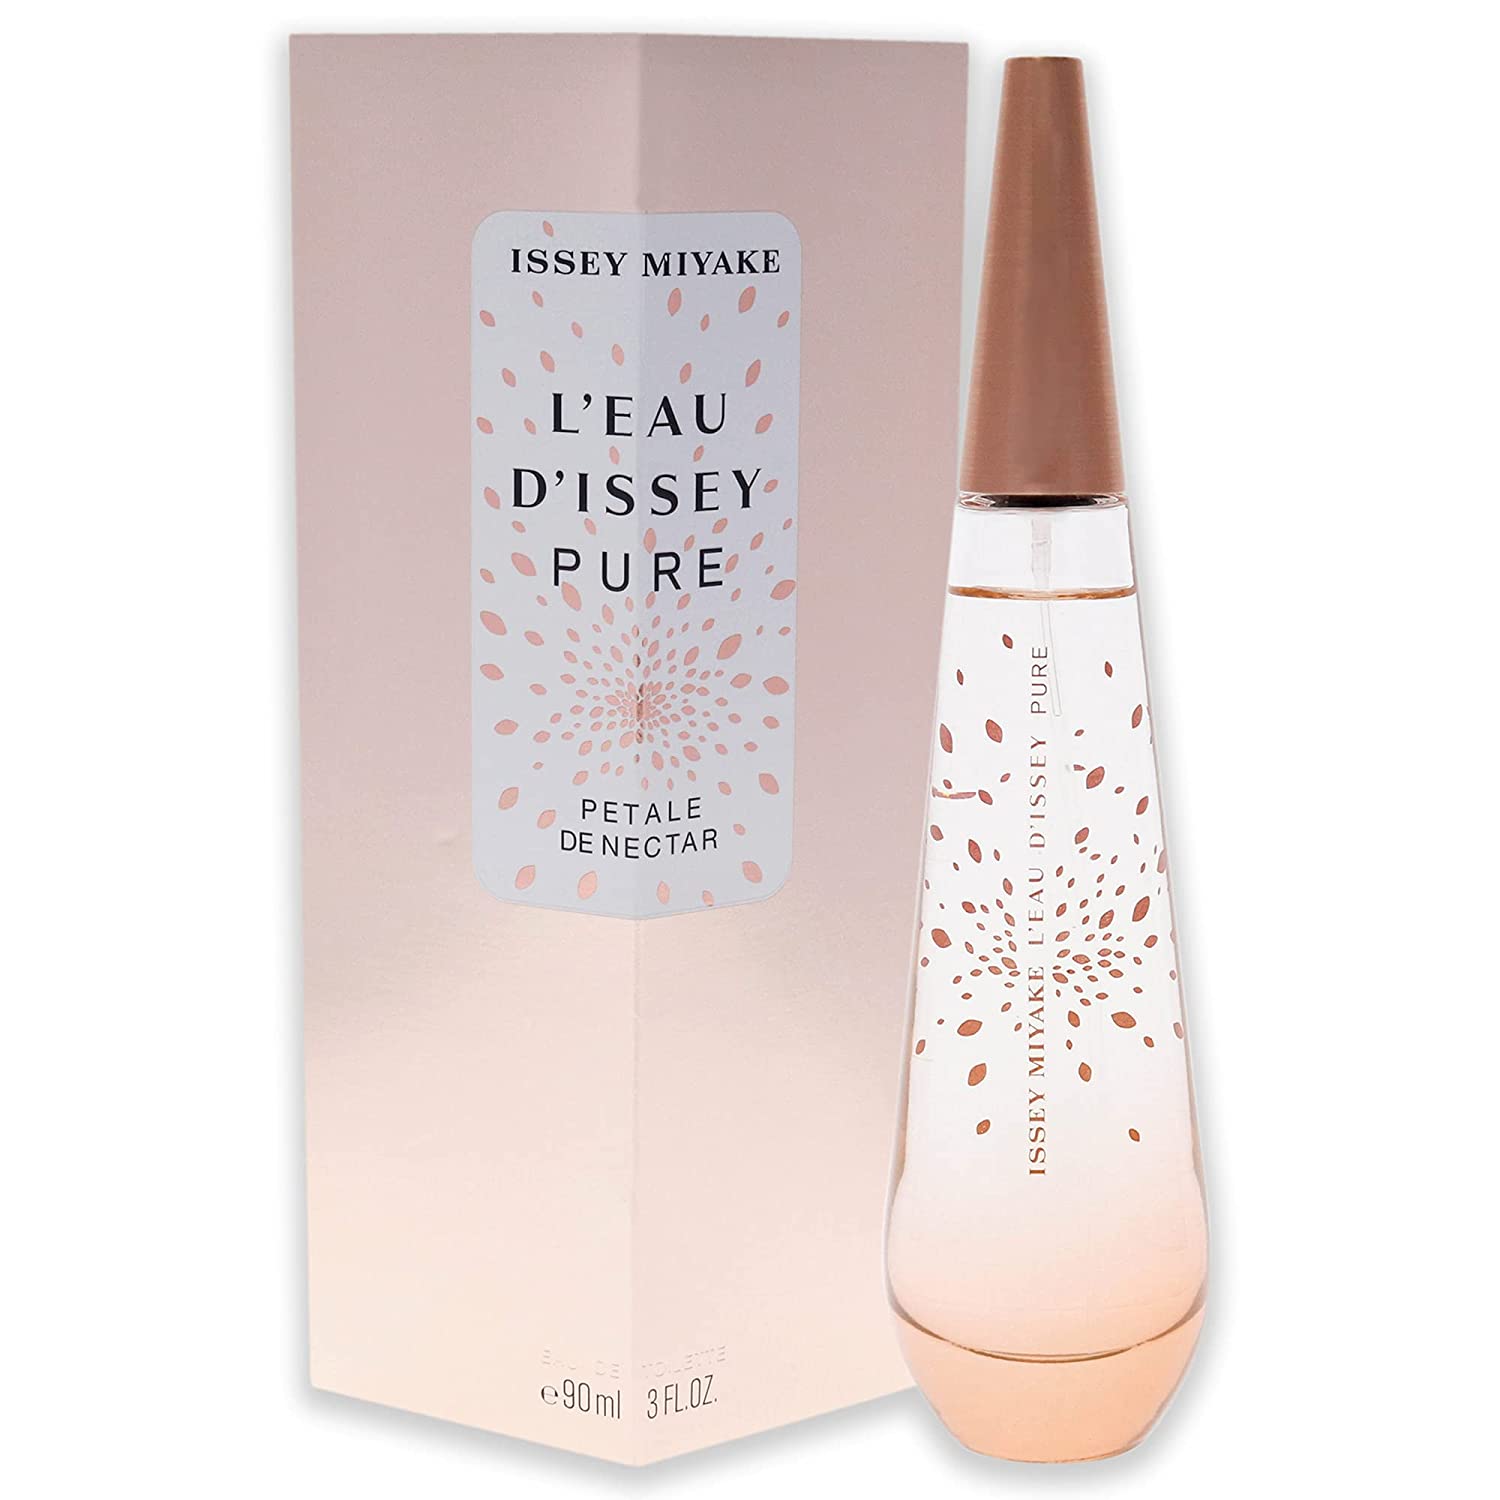 ISSEY MIYAKE D ISSEY PURE PETALE DE NECTAR FOR WOMEN 90 ML EDP